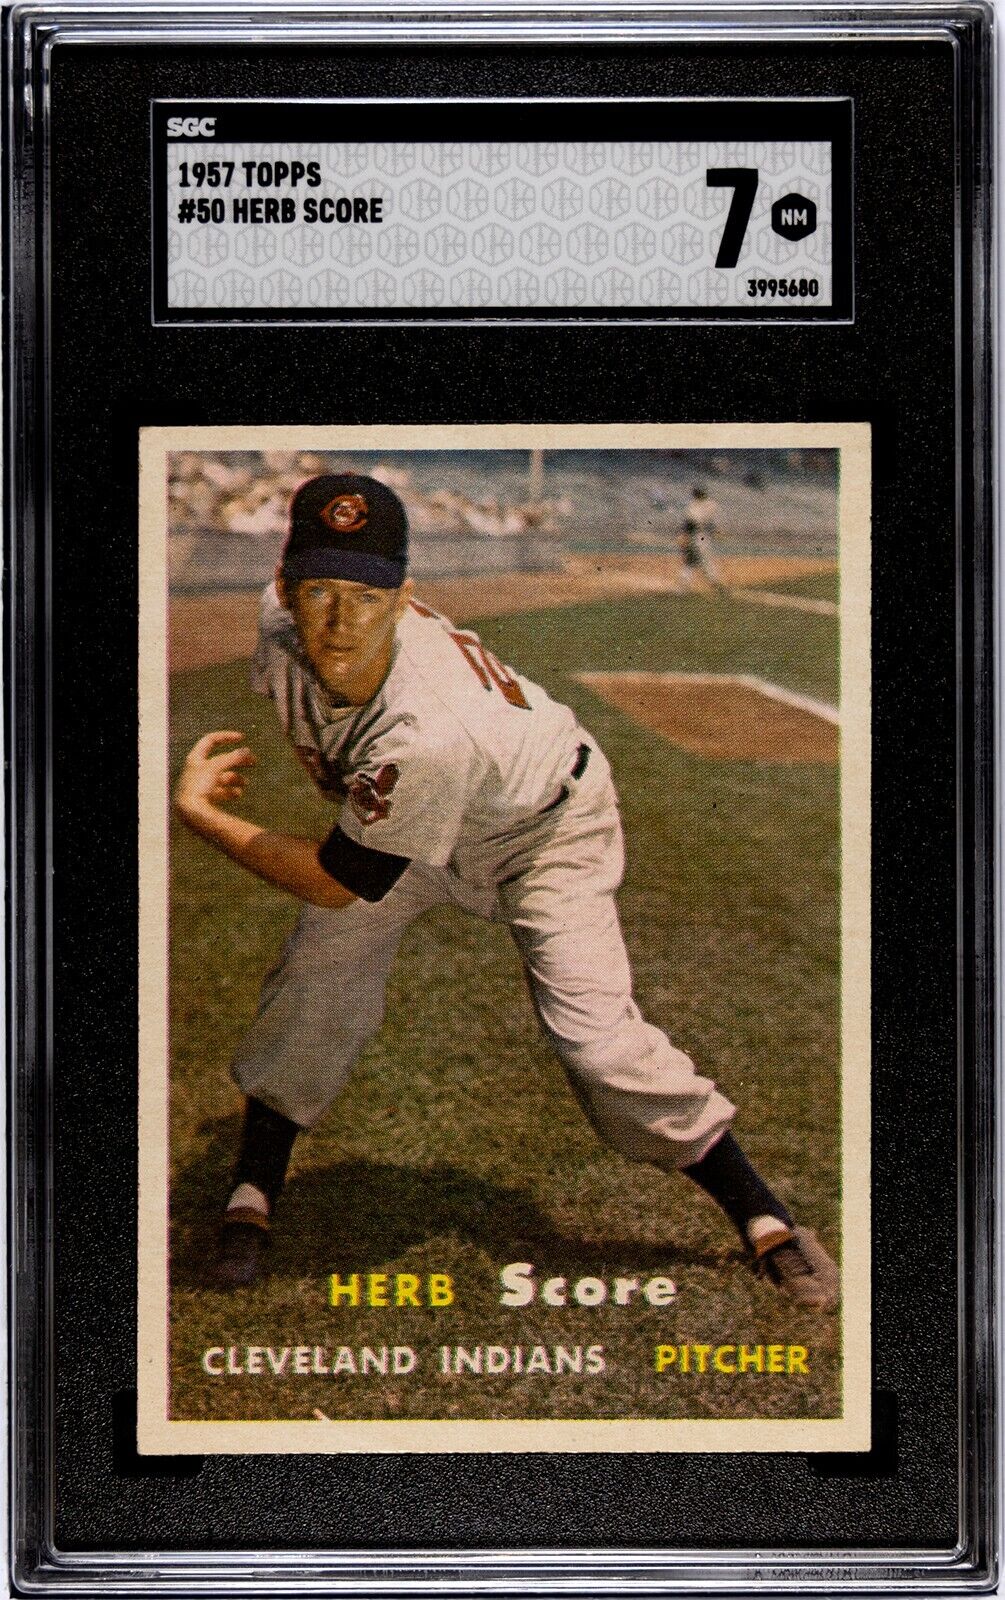 Herb Score 1957 Topps Baseball Card #50- SGC Graded 7 NM (Cleveland Guardians) Image 1